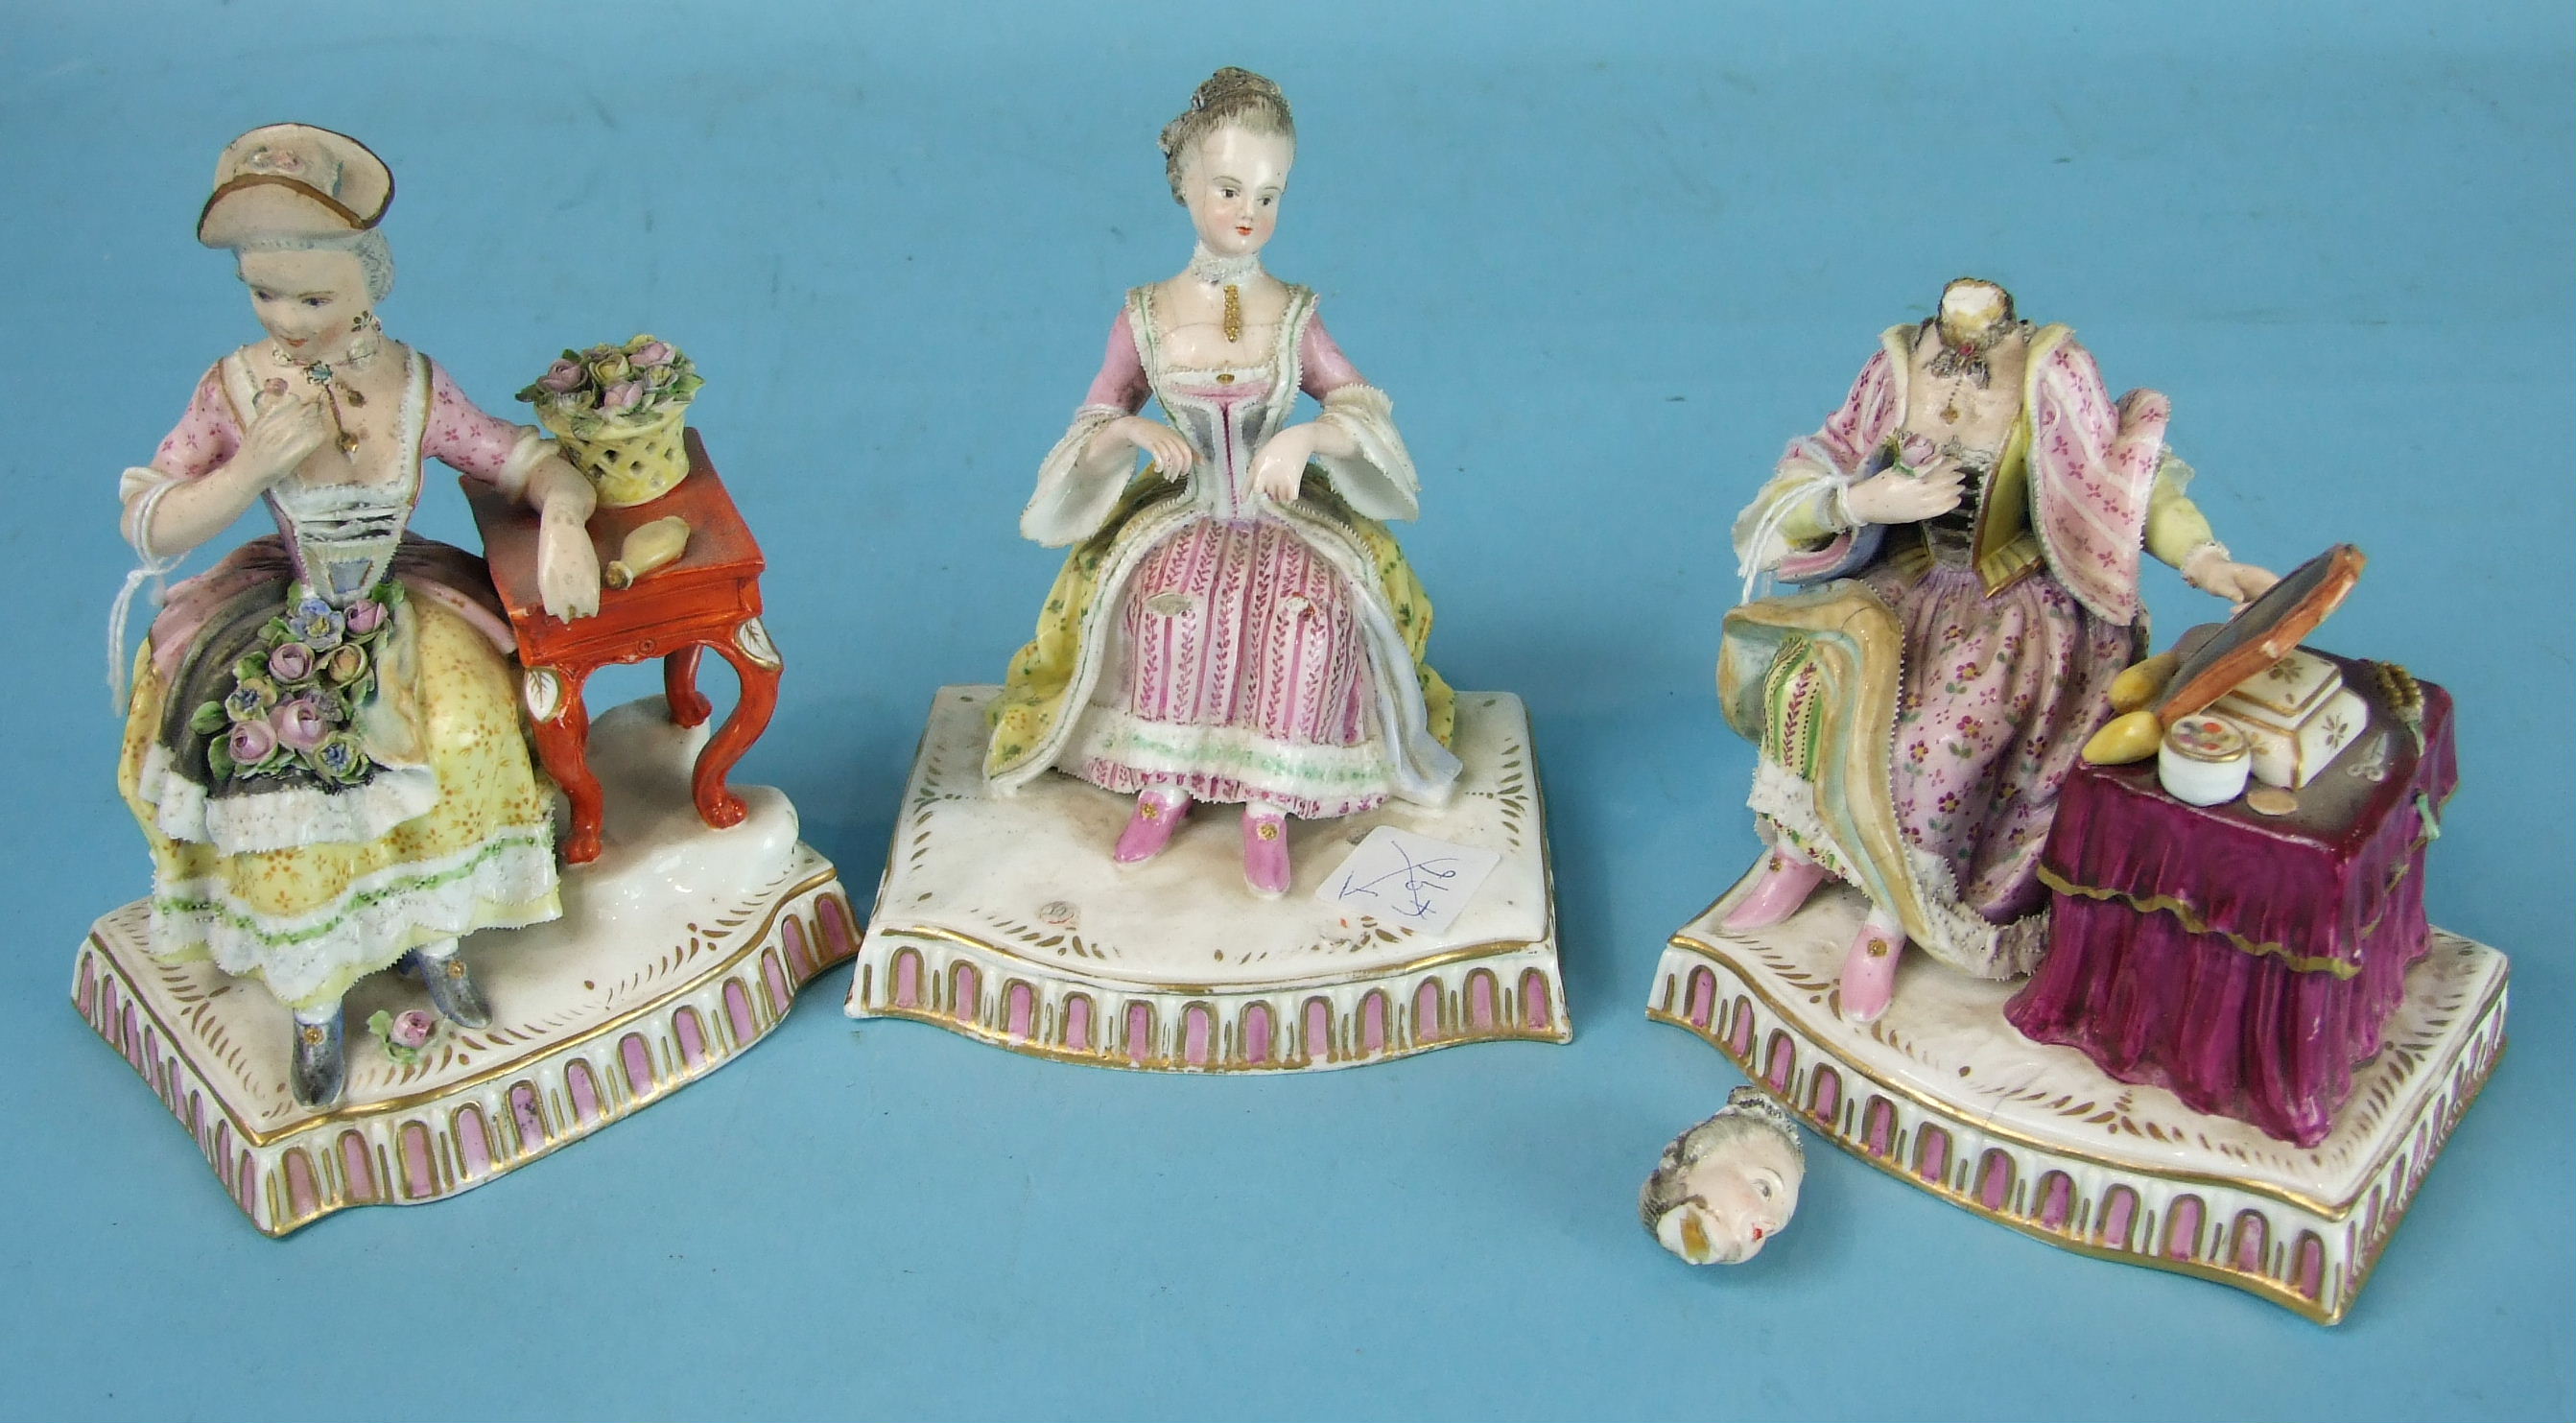 A set of three English porcelain models of the senses after the Meissen originals by Acier, probably